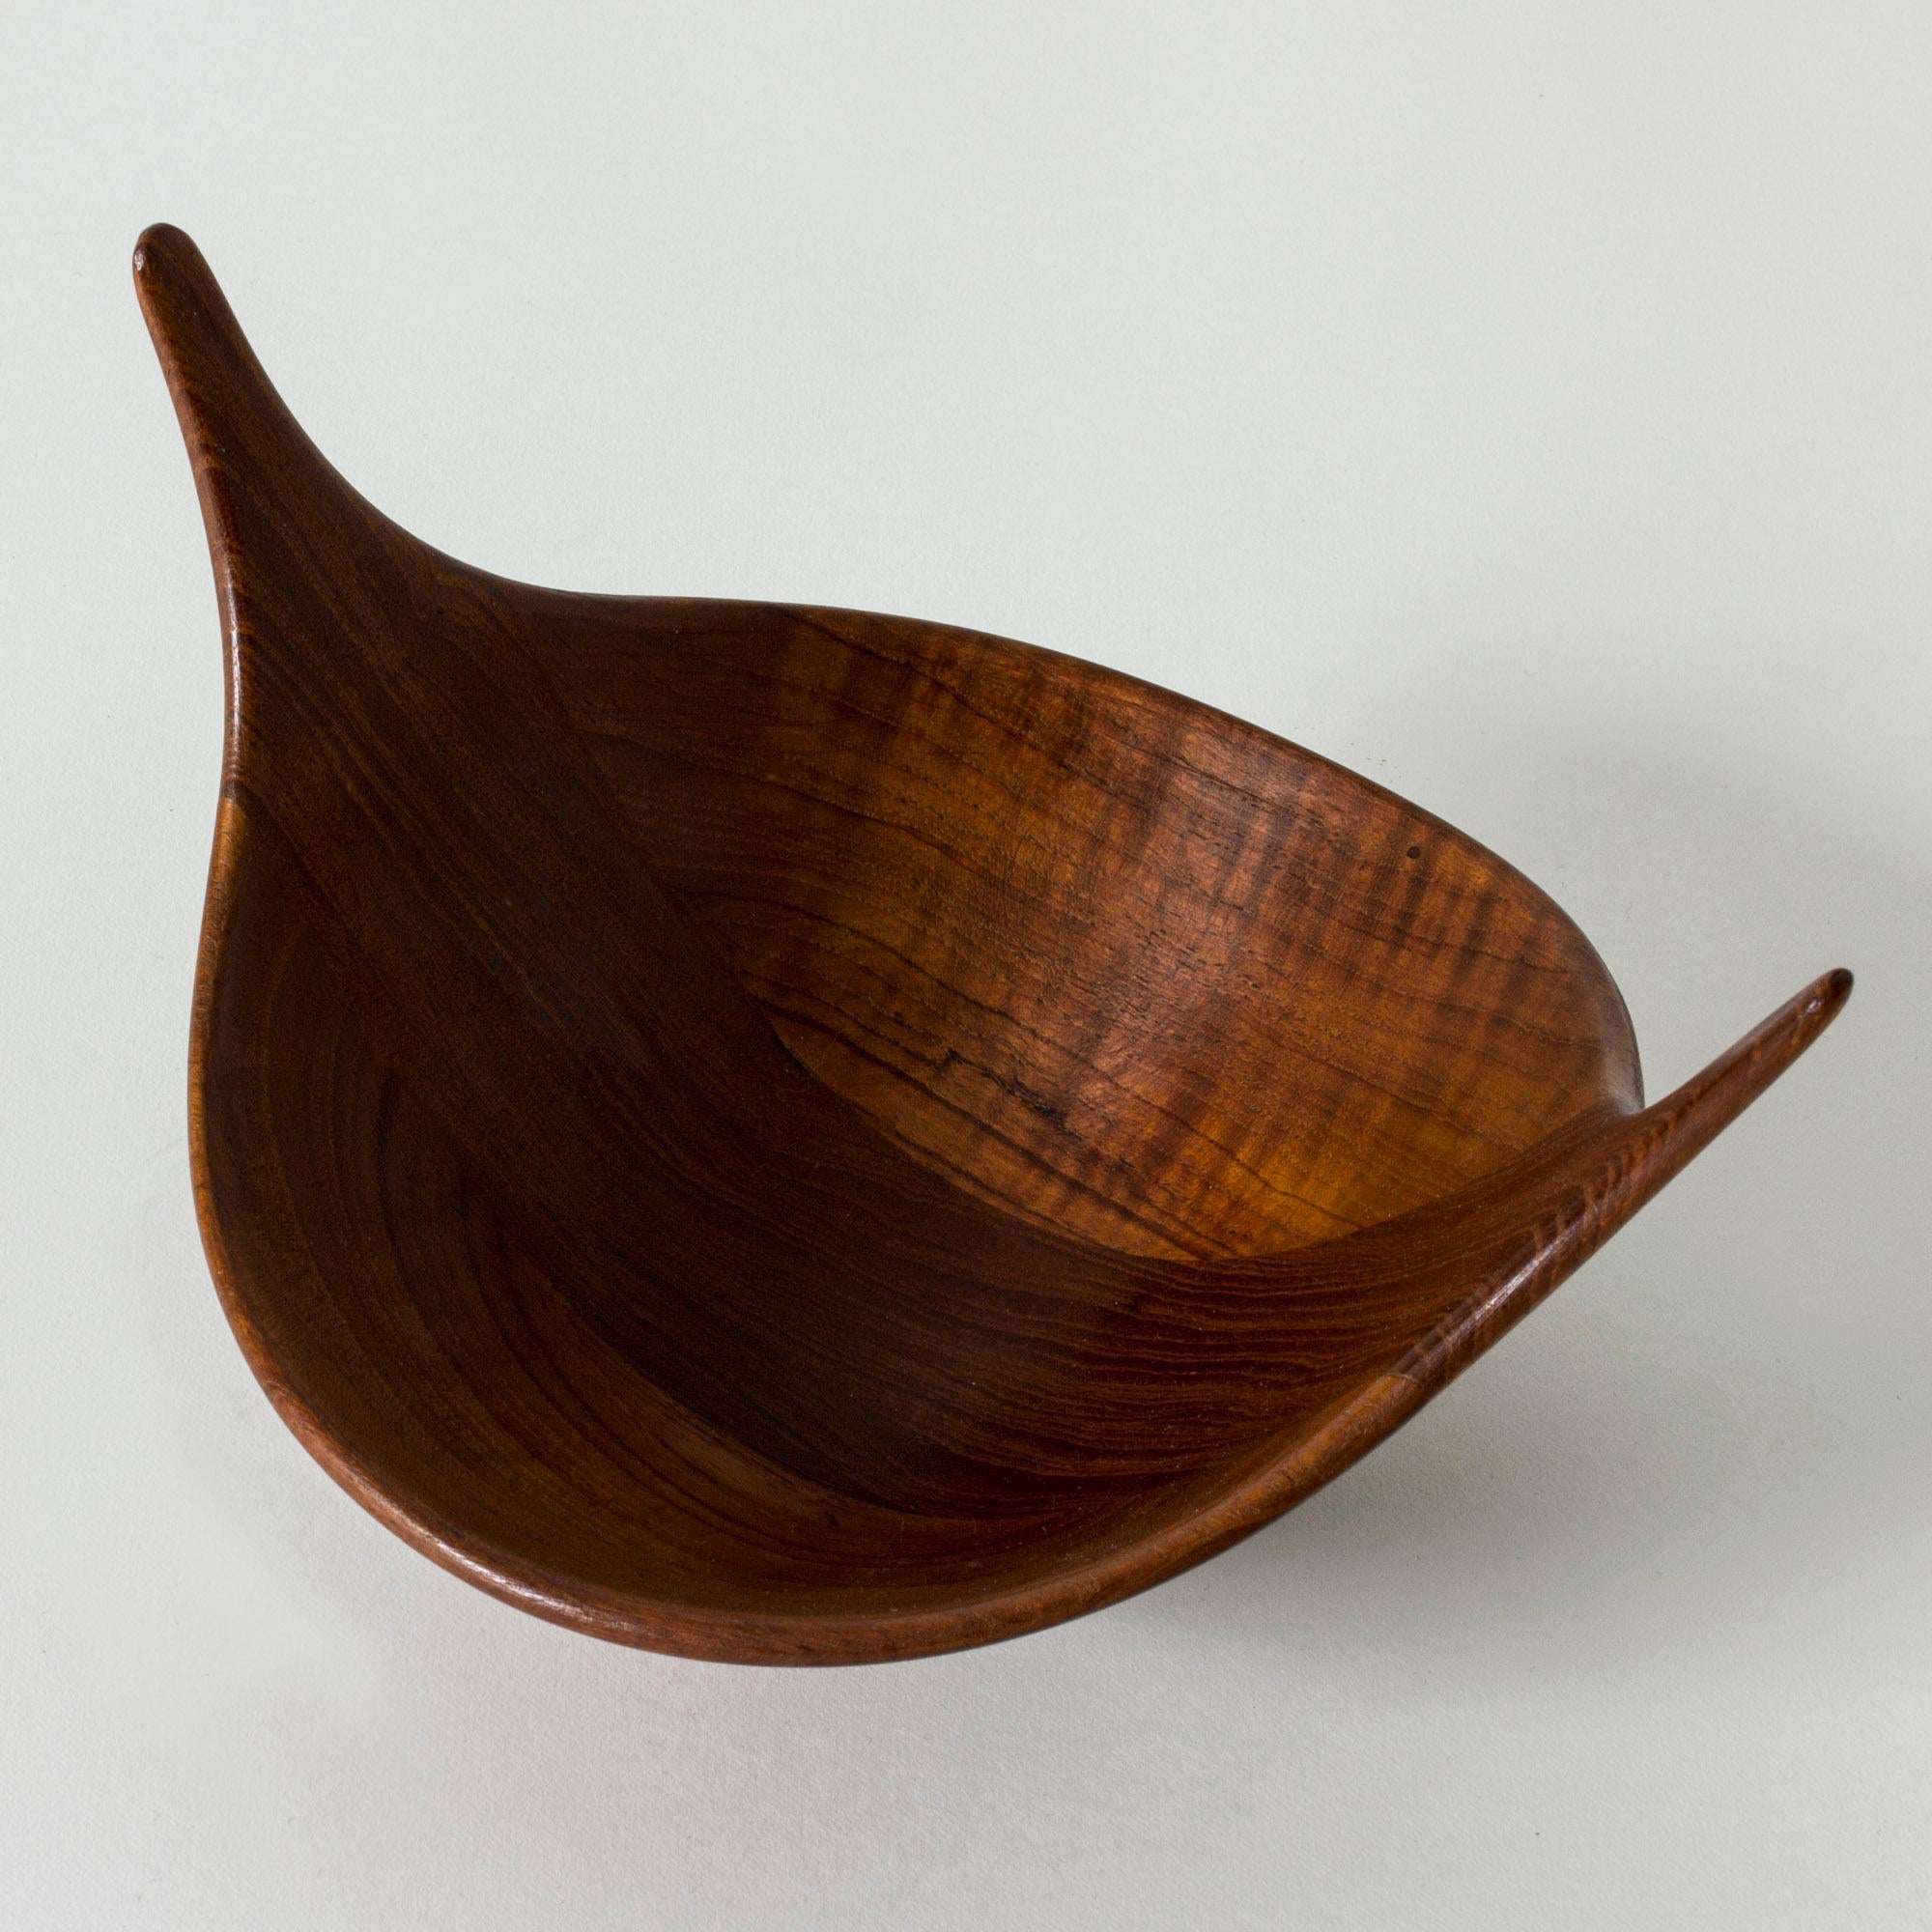 Lovely bowl by Johnny Mattsson, sculpted from teak in a smooth form with drawn out, pointy ends. Beautiful woodgrain, seamless joinery.